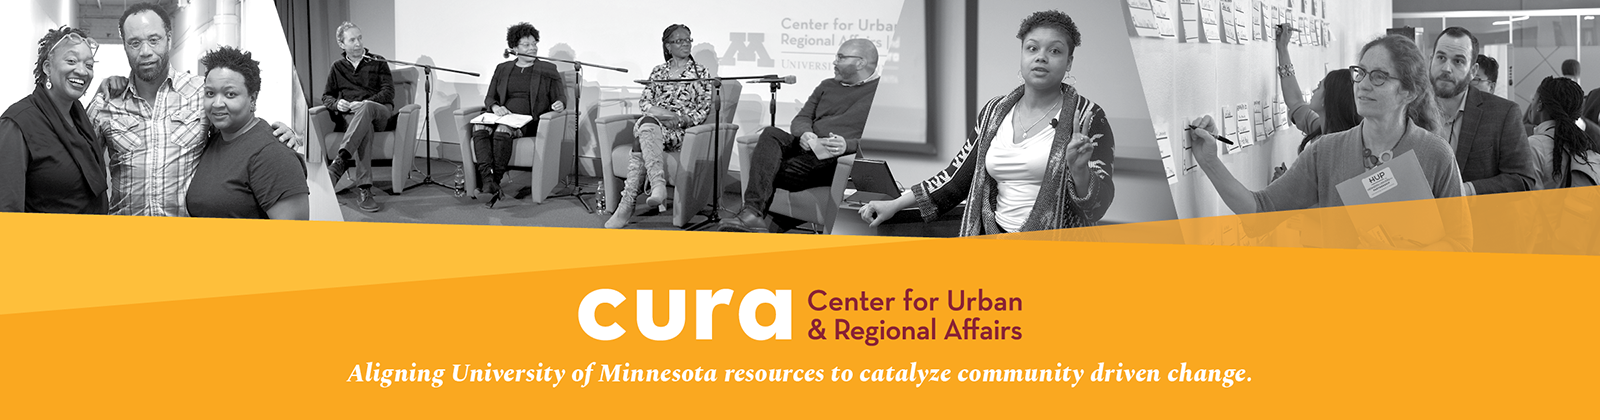 CURA about page header, "aligns University of Minnesota resources to catalyze community driven change"